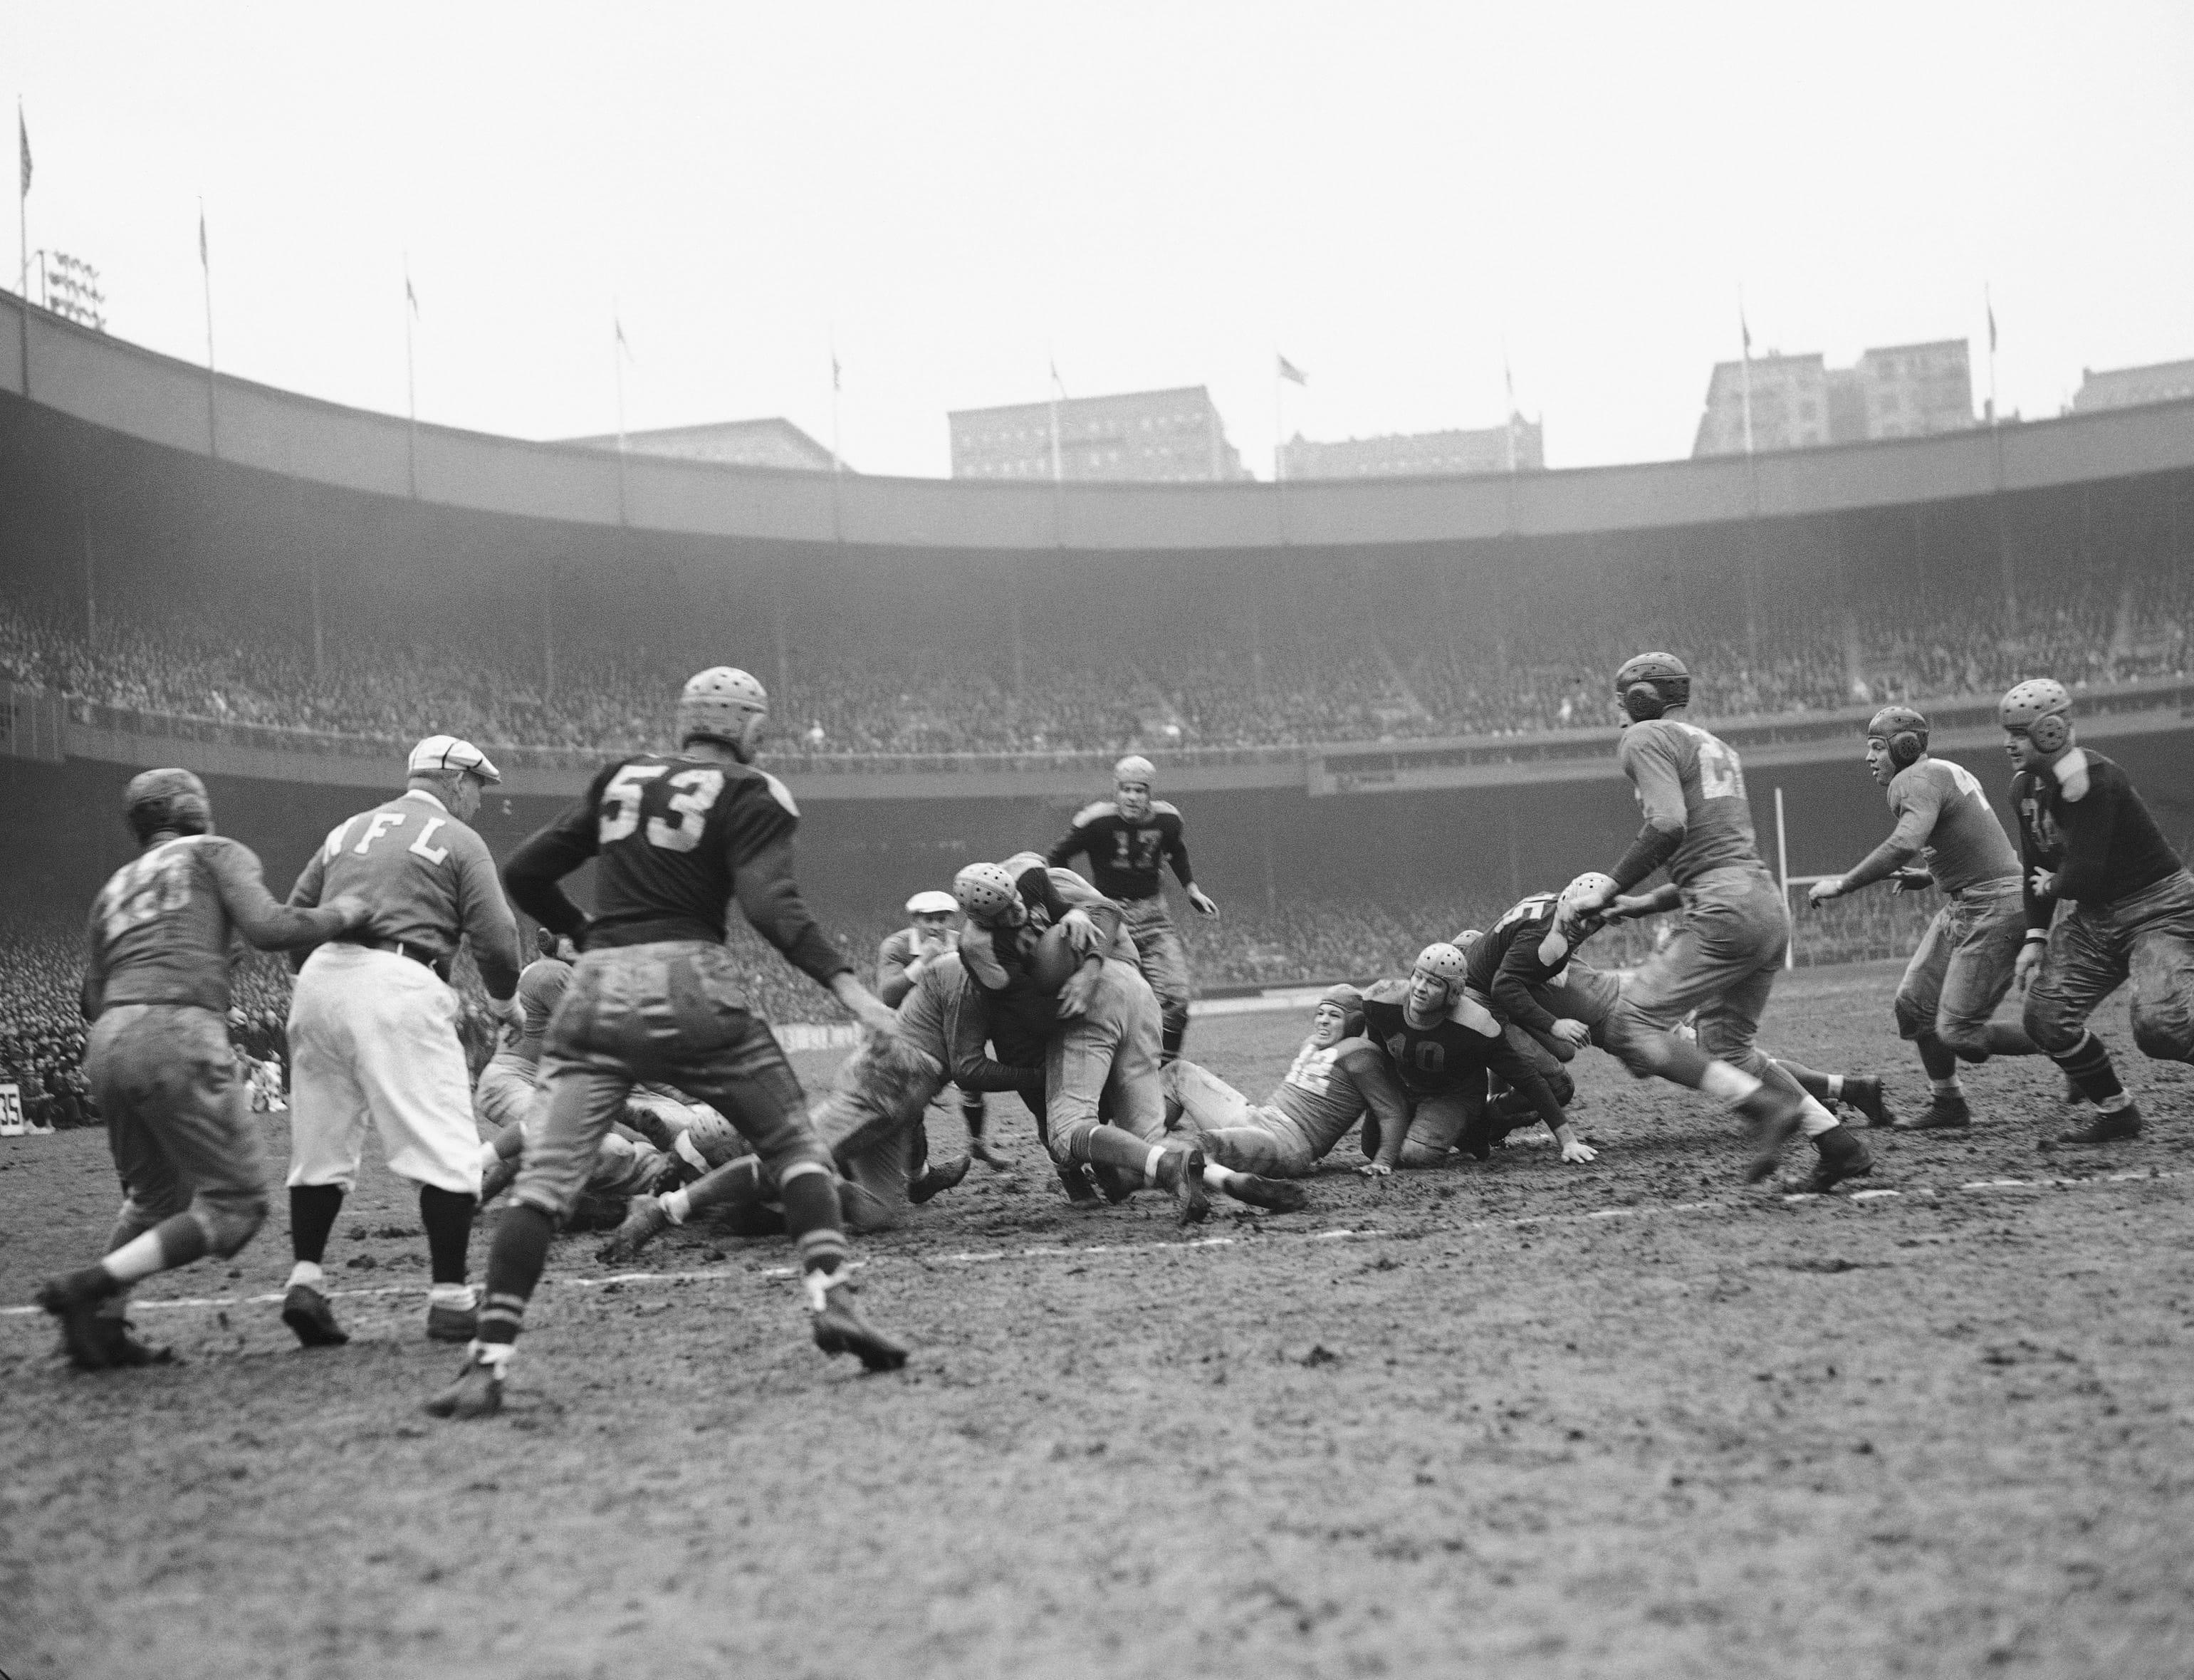 The Green Bay Packers and New York Giants play in the 1938 NFL championship game at the Polo Grounds in New York.